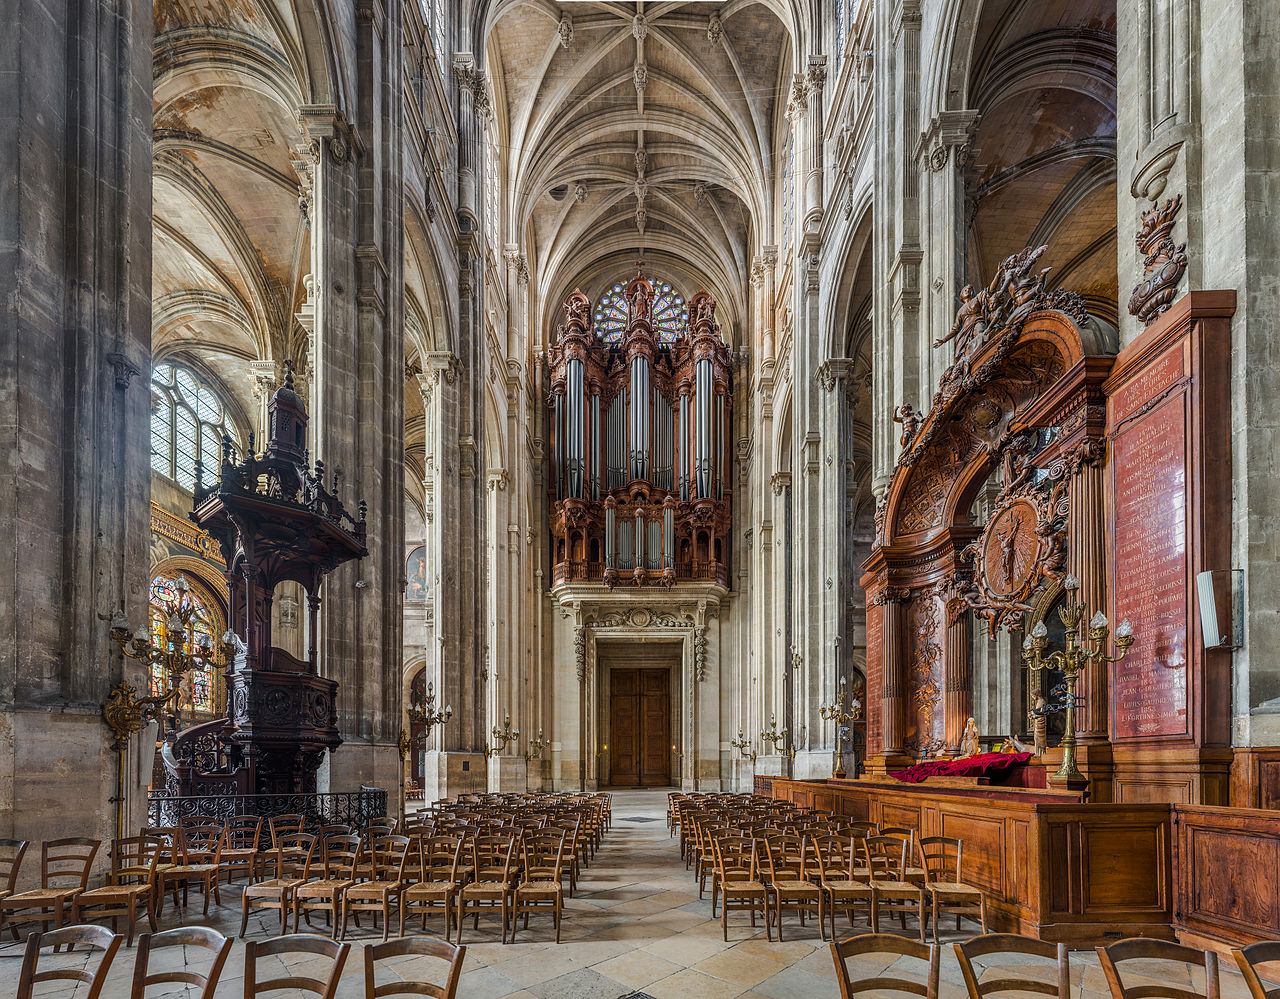 Church_of_St_Eustace_Organ_and_Pulpit,_Paris,_France_-_Diliff